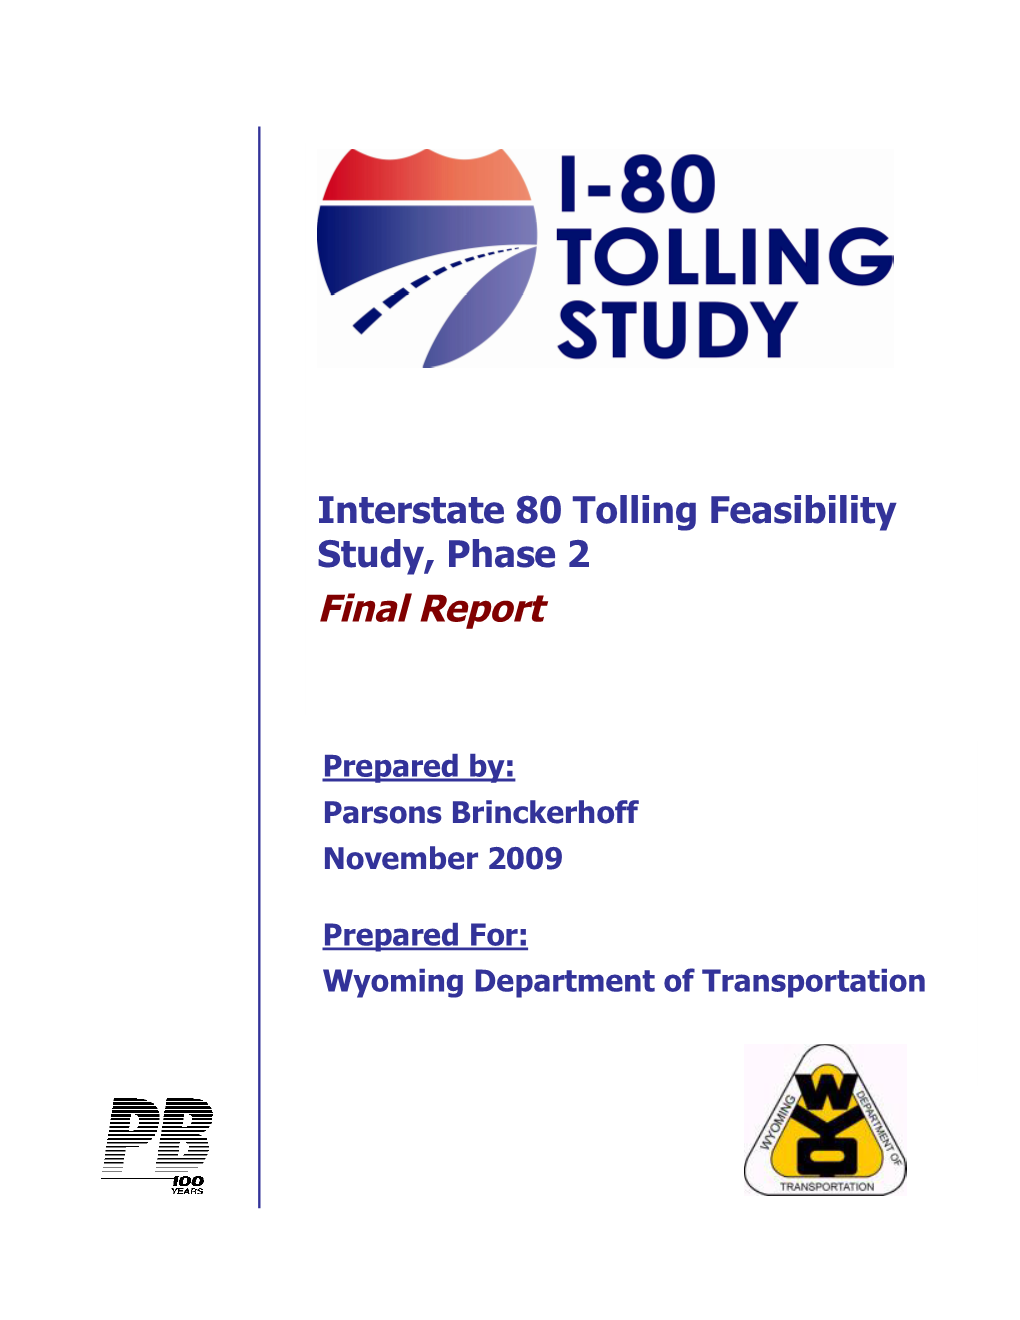 Interstate 80 Tolling Feasibility Study, Phase 2 Final Report